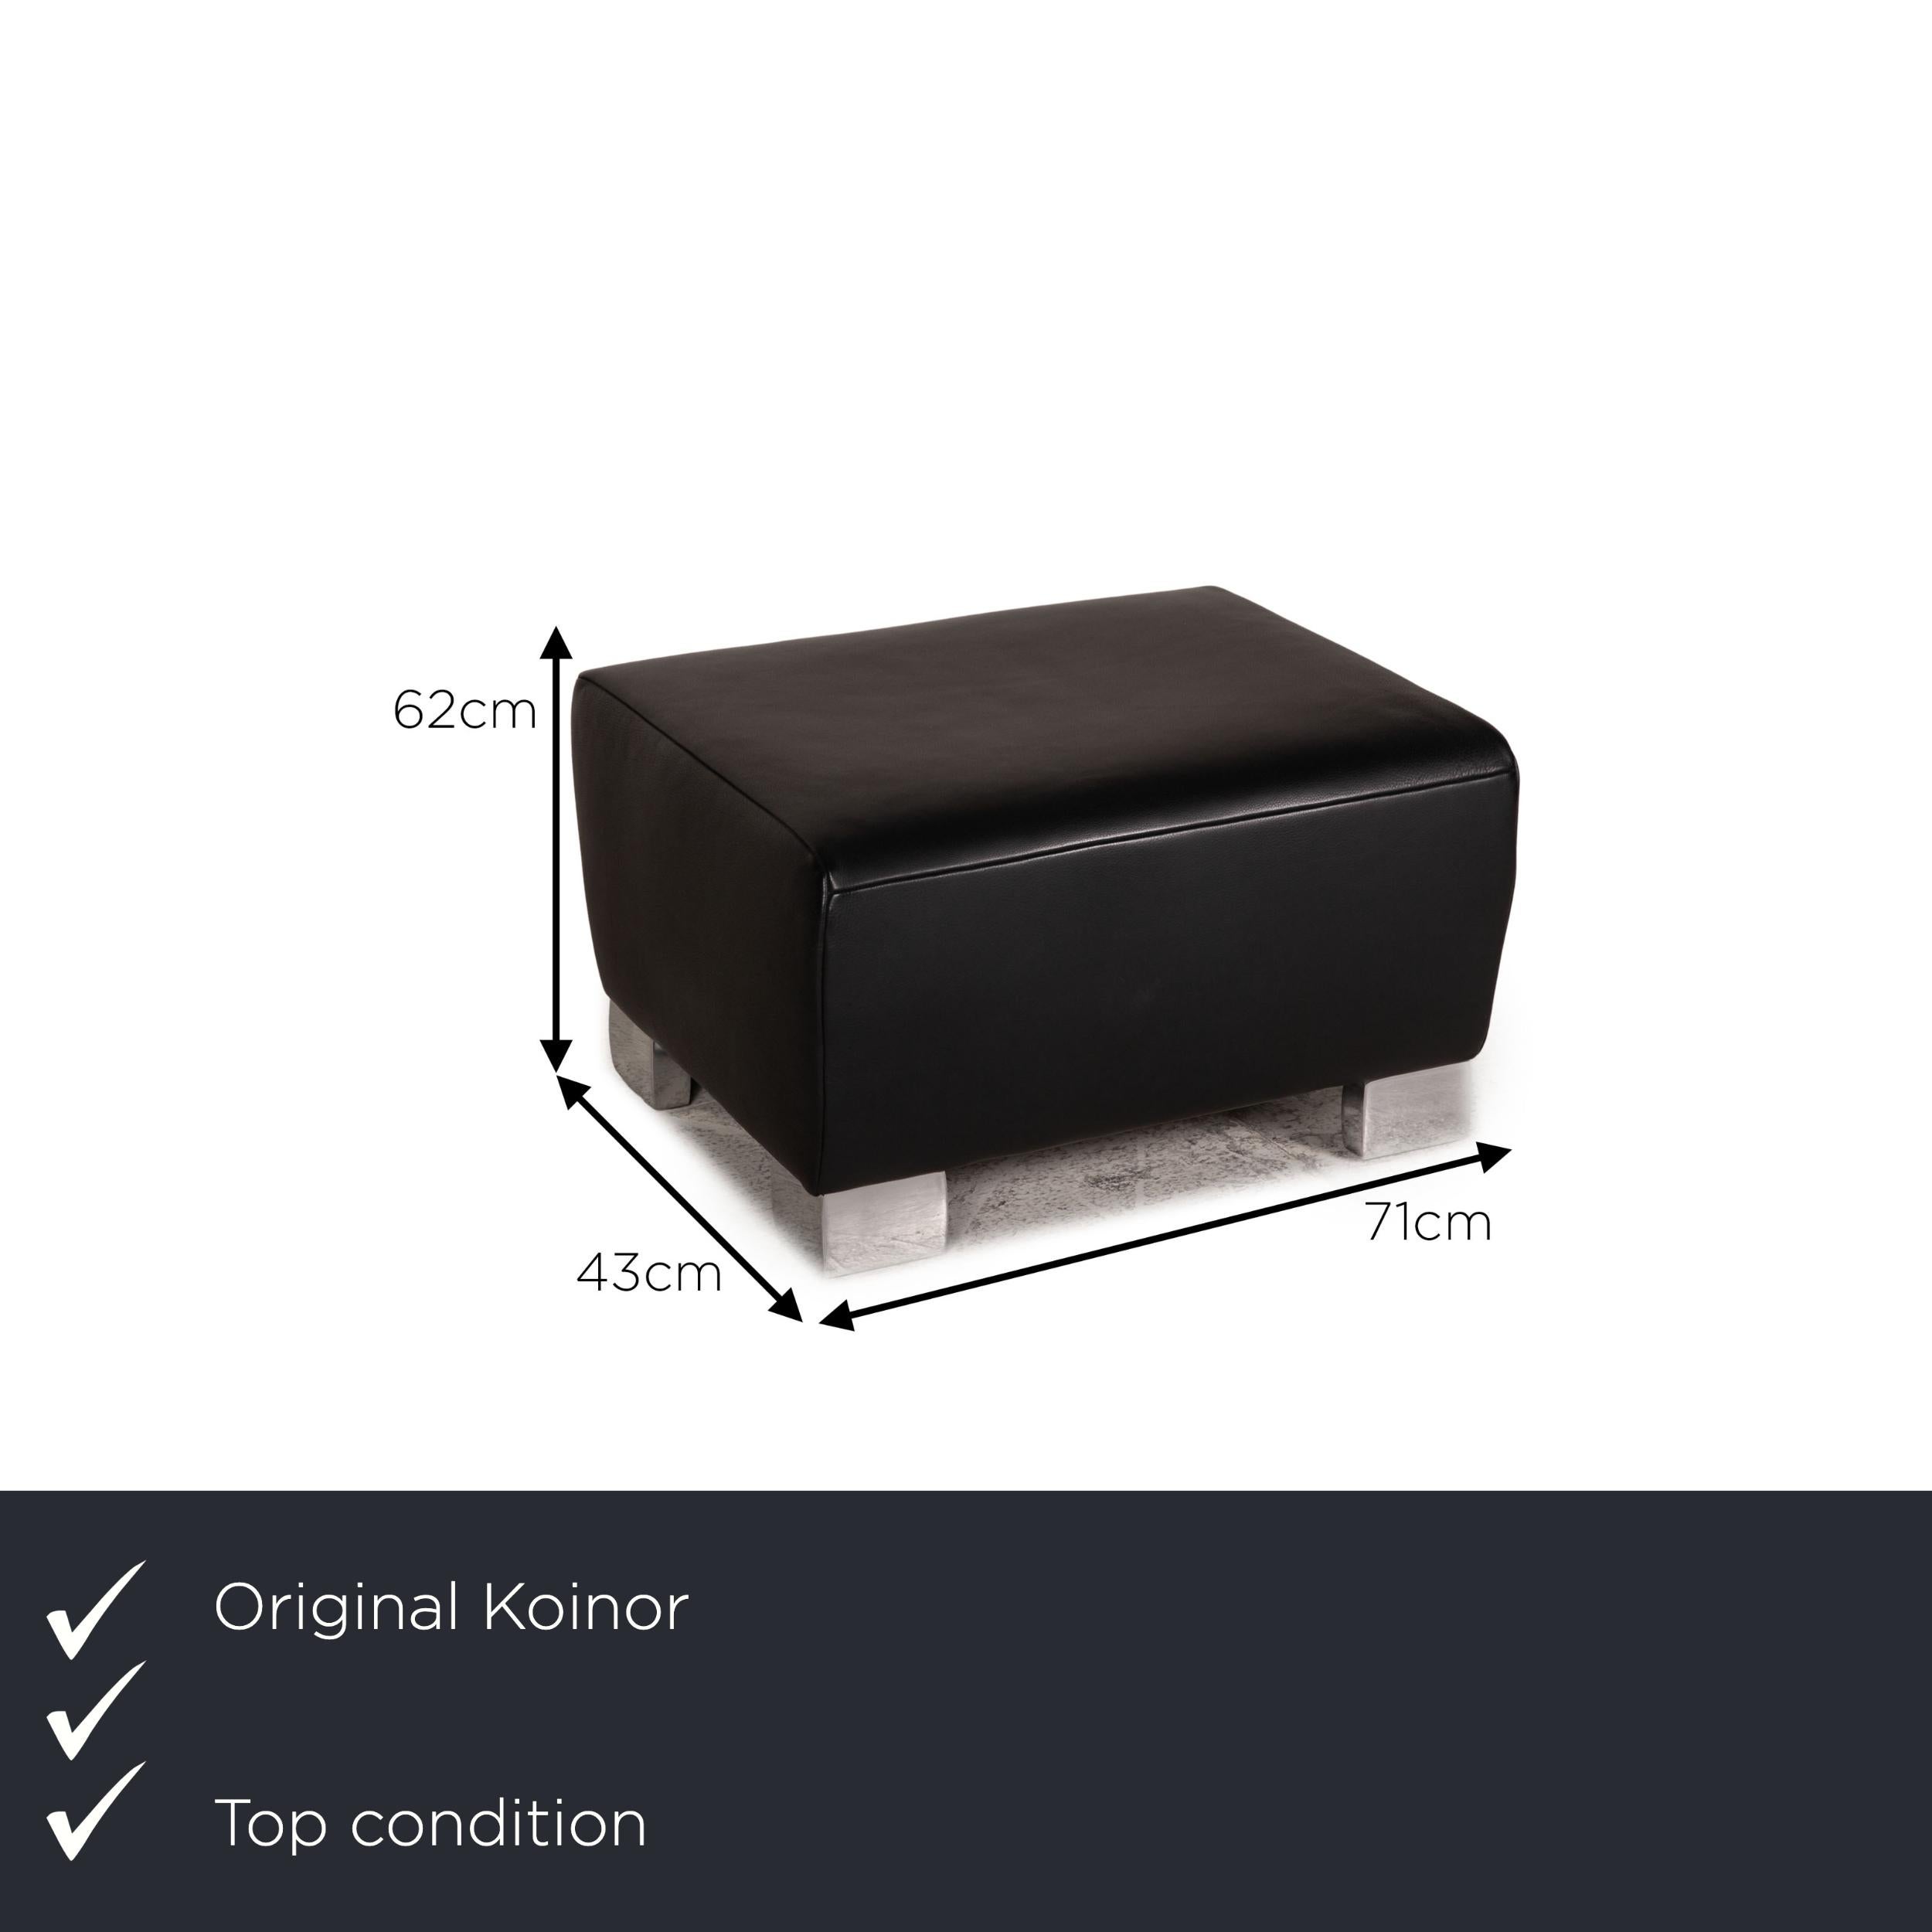 We present to you a Koinor Volare leather stool black.

Product measurements in centimeters:

depth: 43
width: 71
height: 62.






 